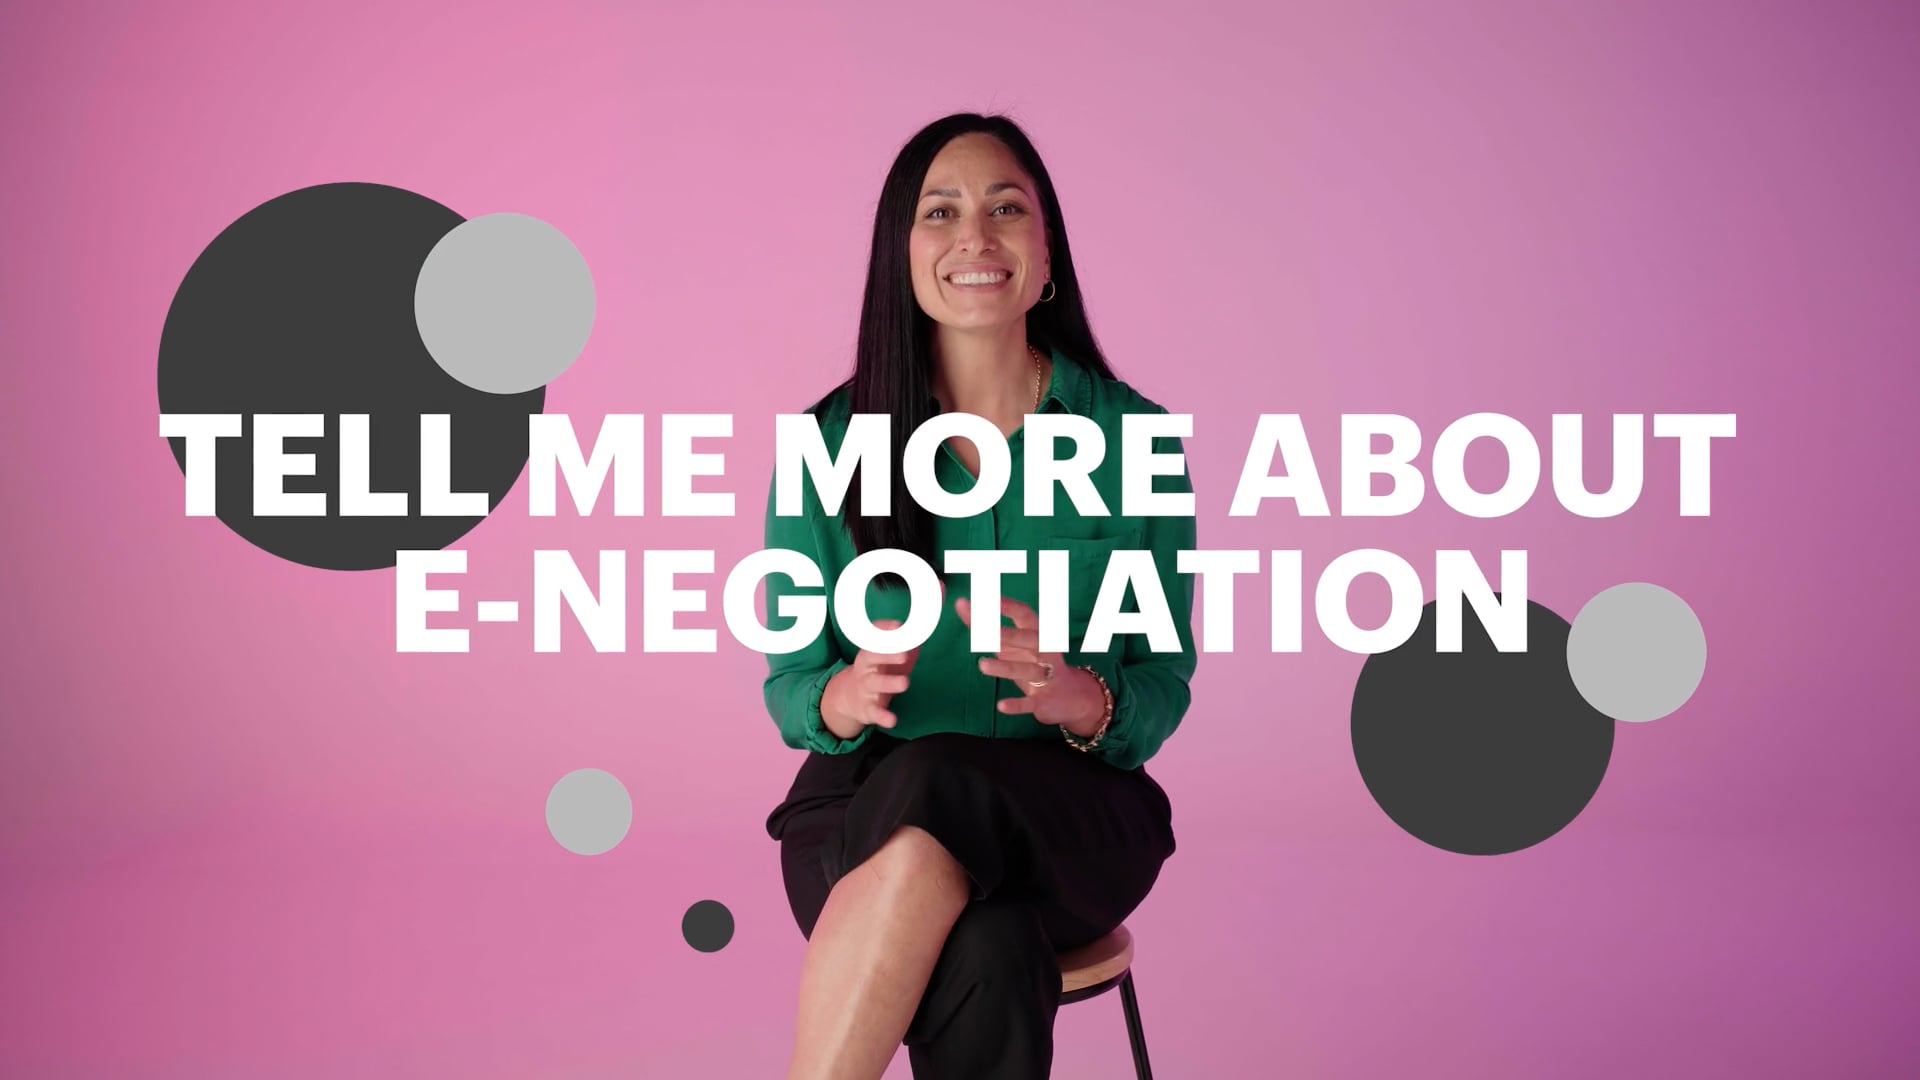 The Domain Name Commission - Tell me more about e-negotiation